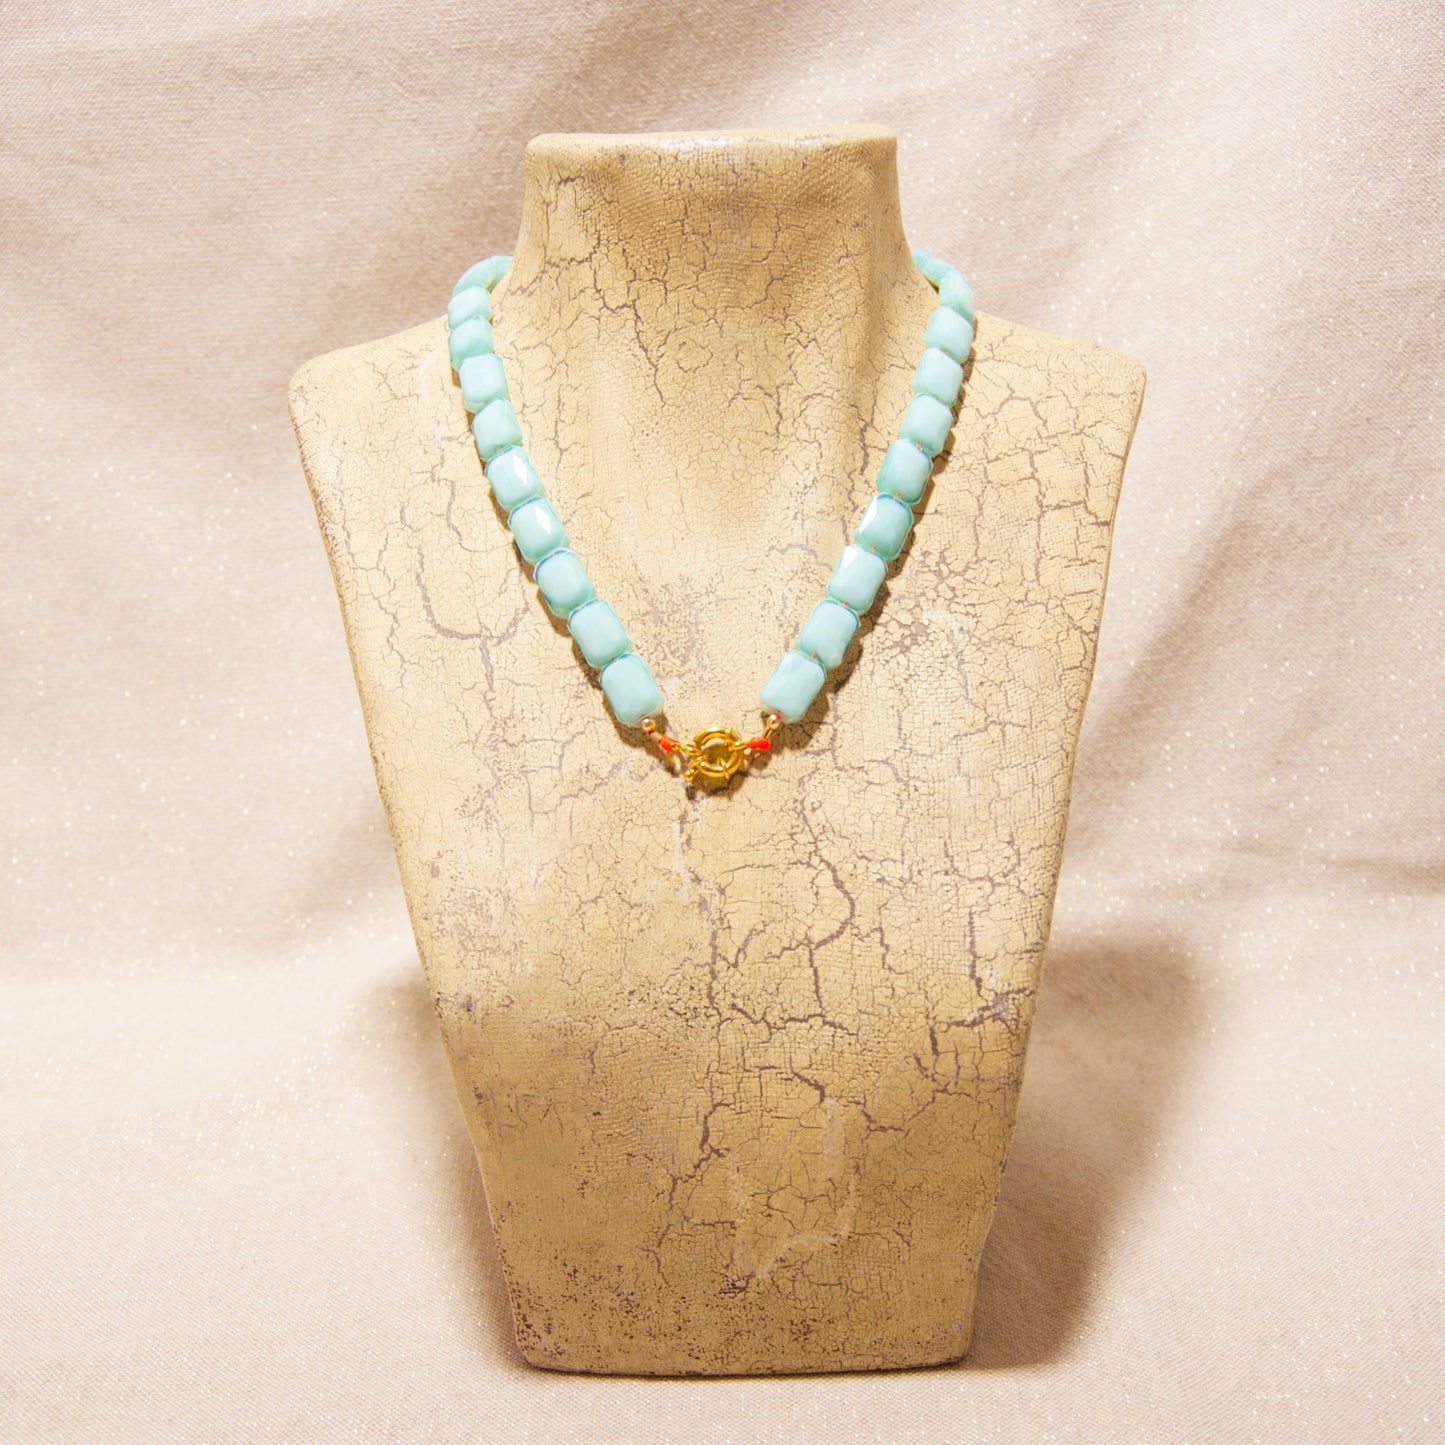 Necklaces - Blue Glass Beads - Neon Brazilian Cord